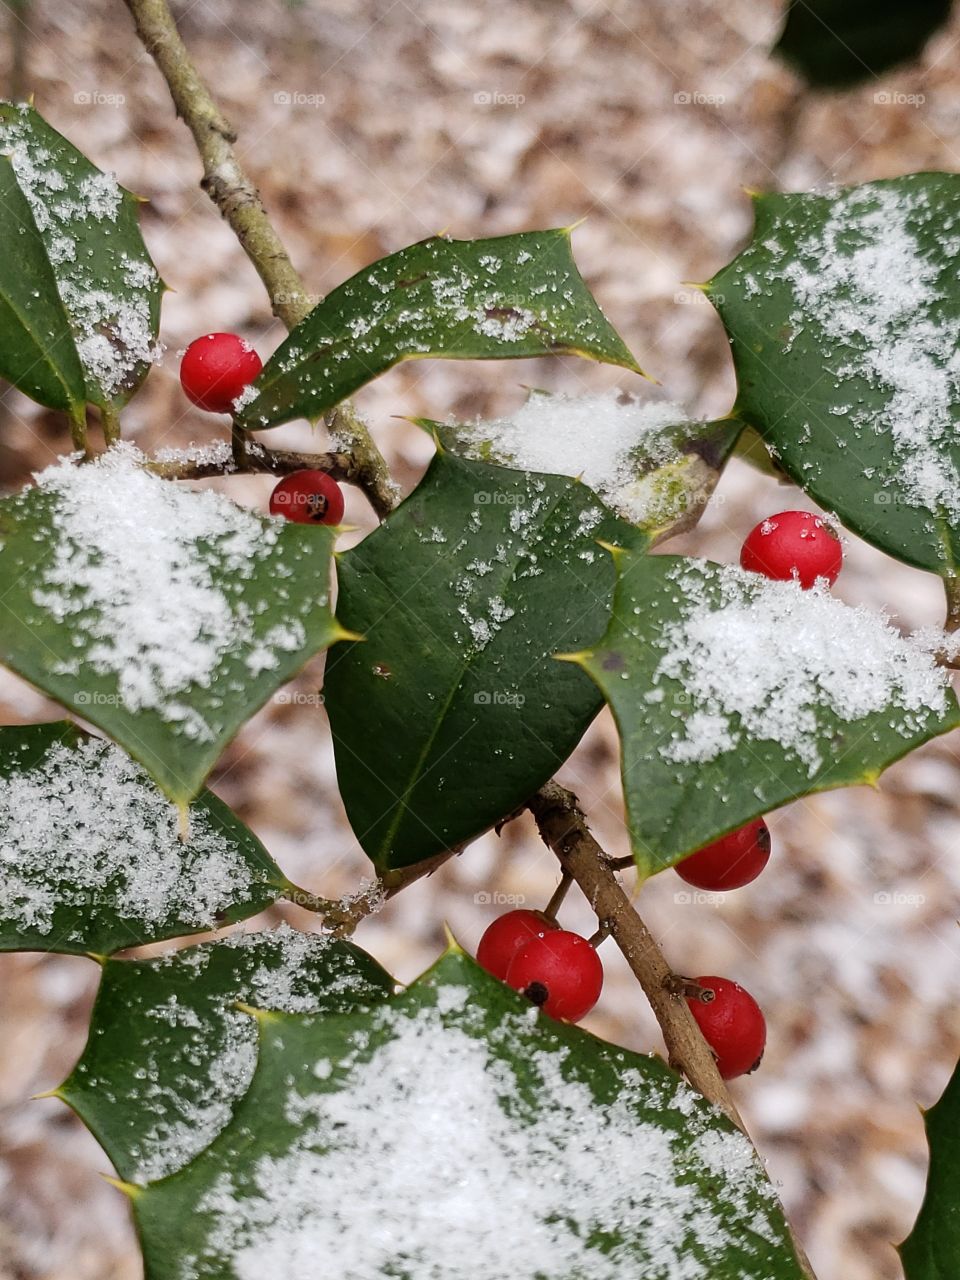 snow on holly leaves and berries